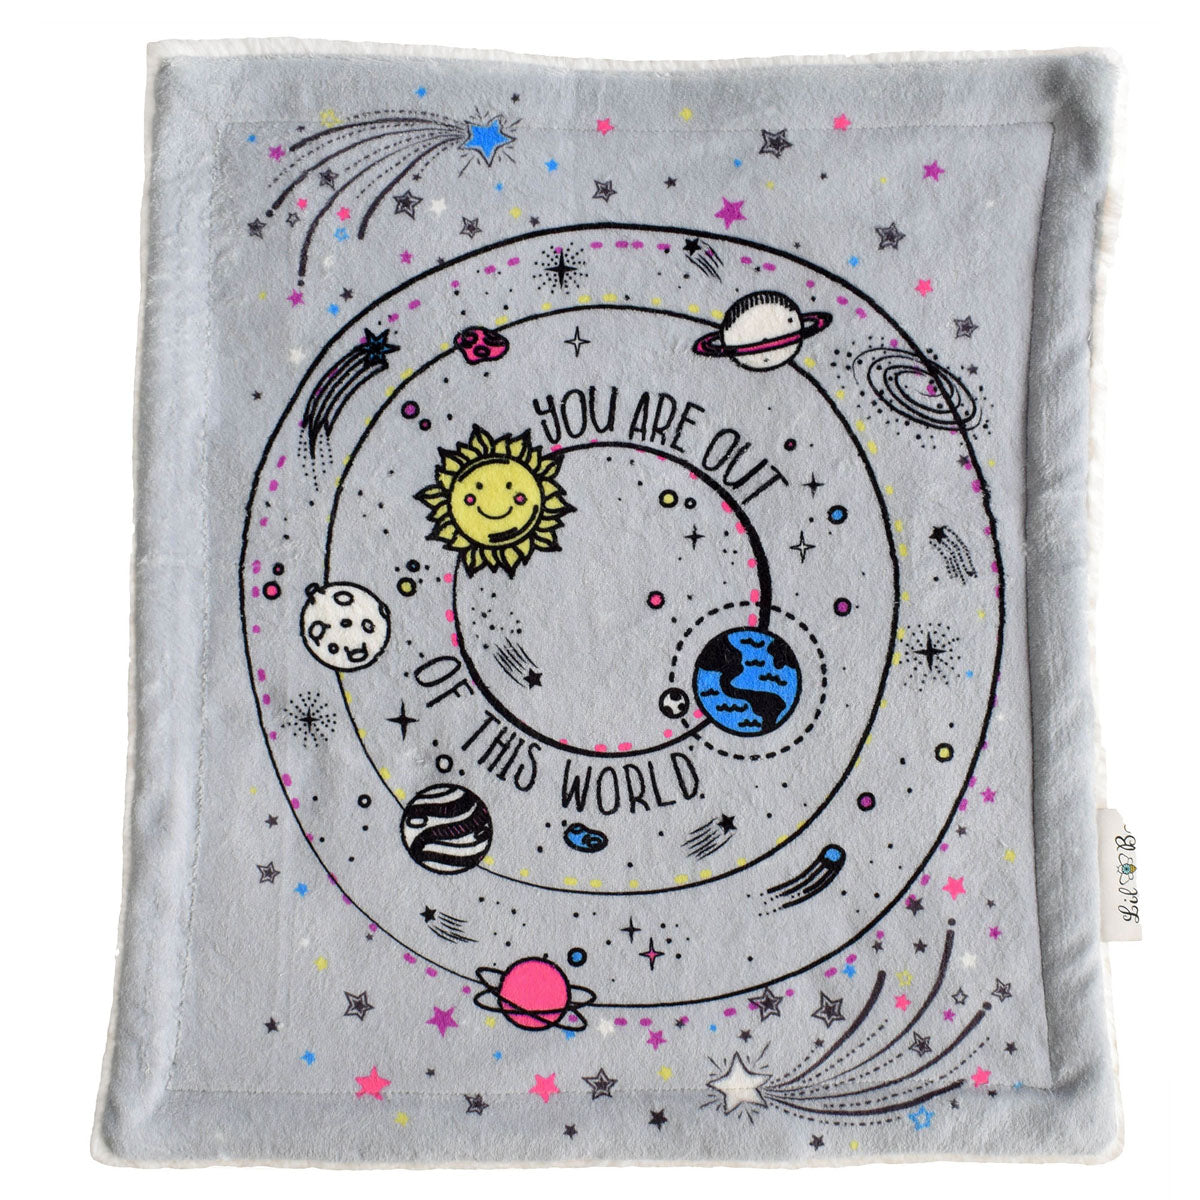 You are out of this world security blanket from Lil Be